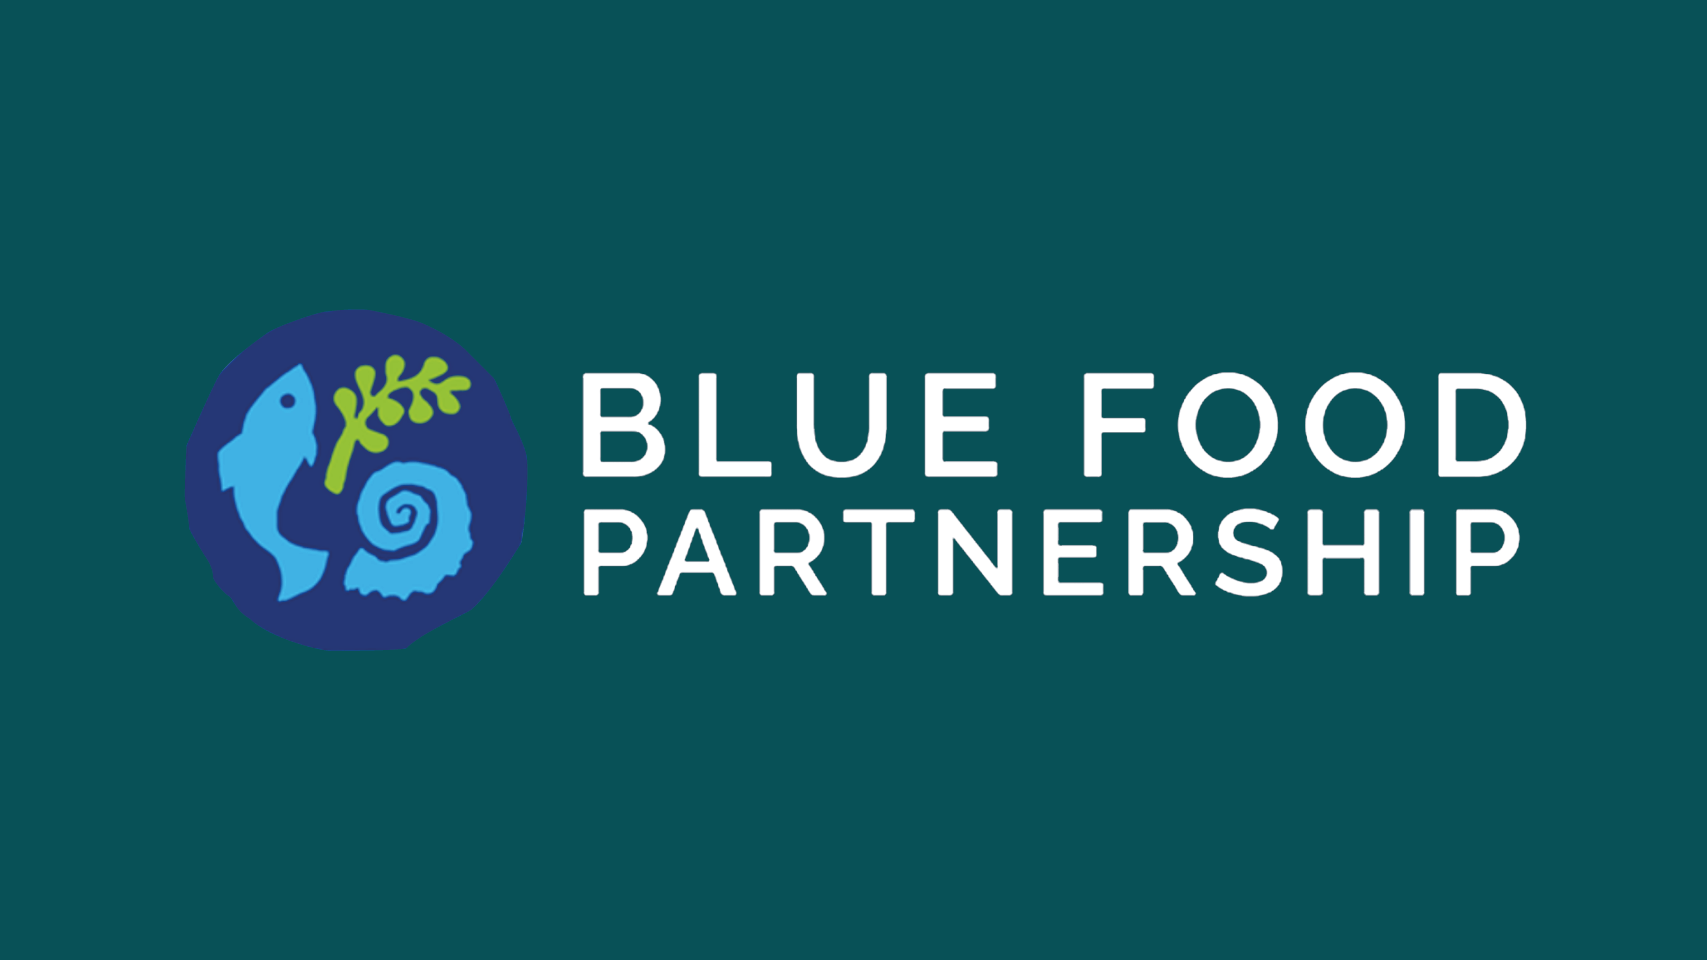 Accelerated sustainability program and kick-started our blue food movement.